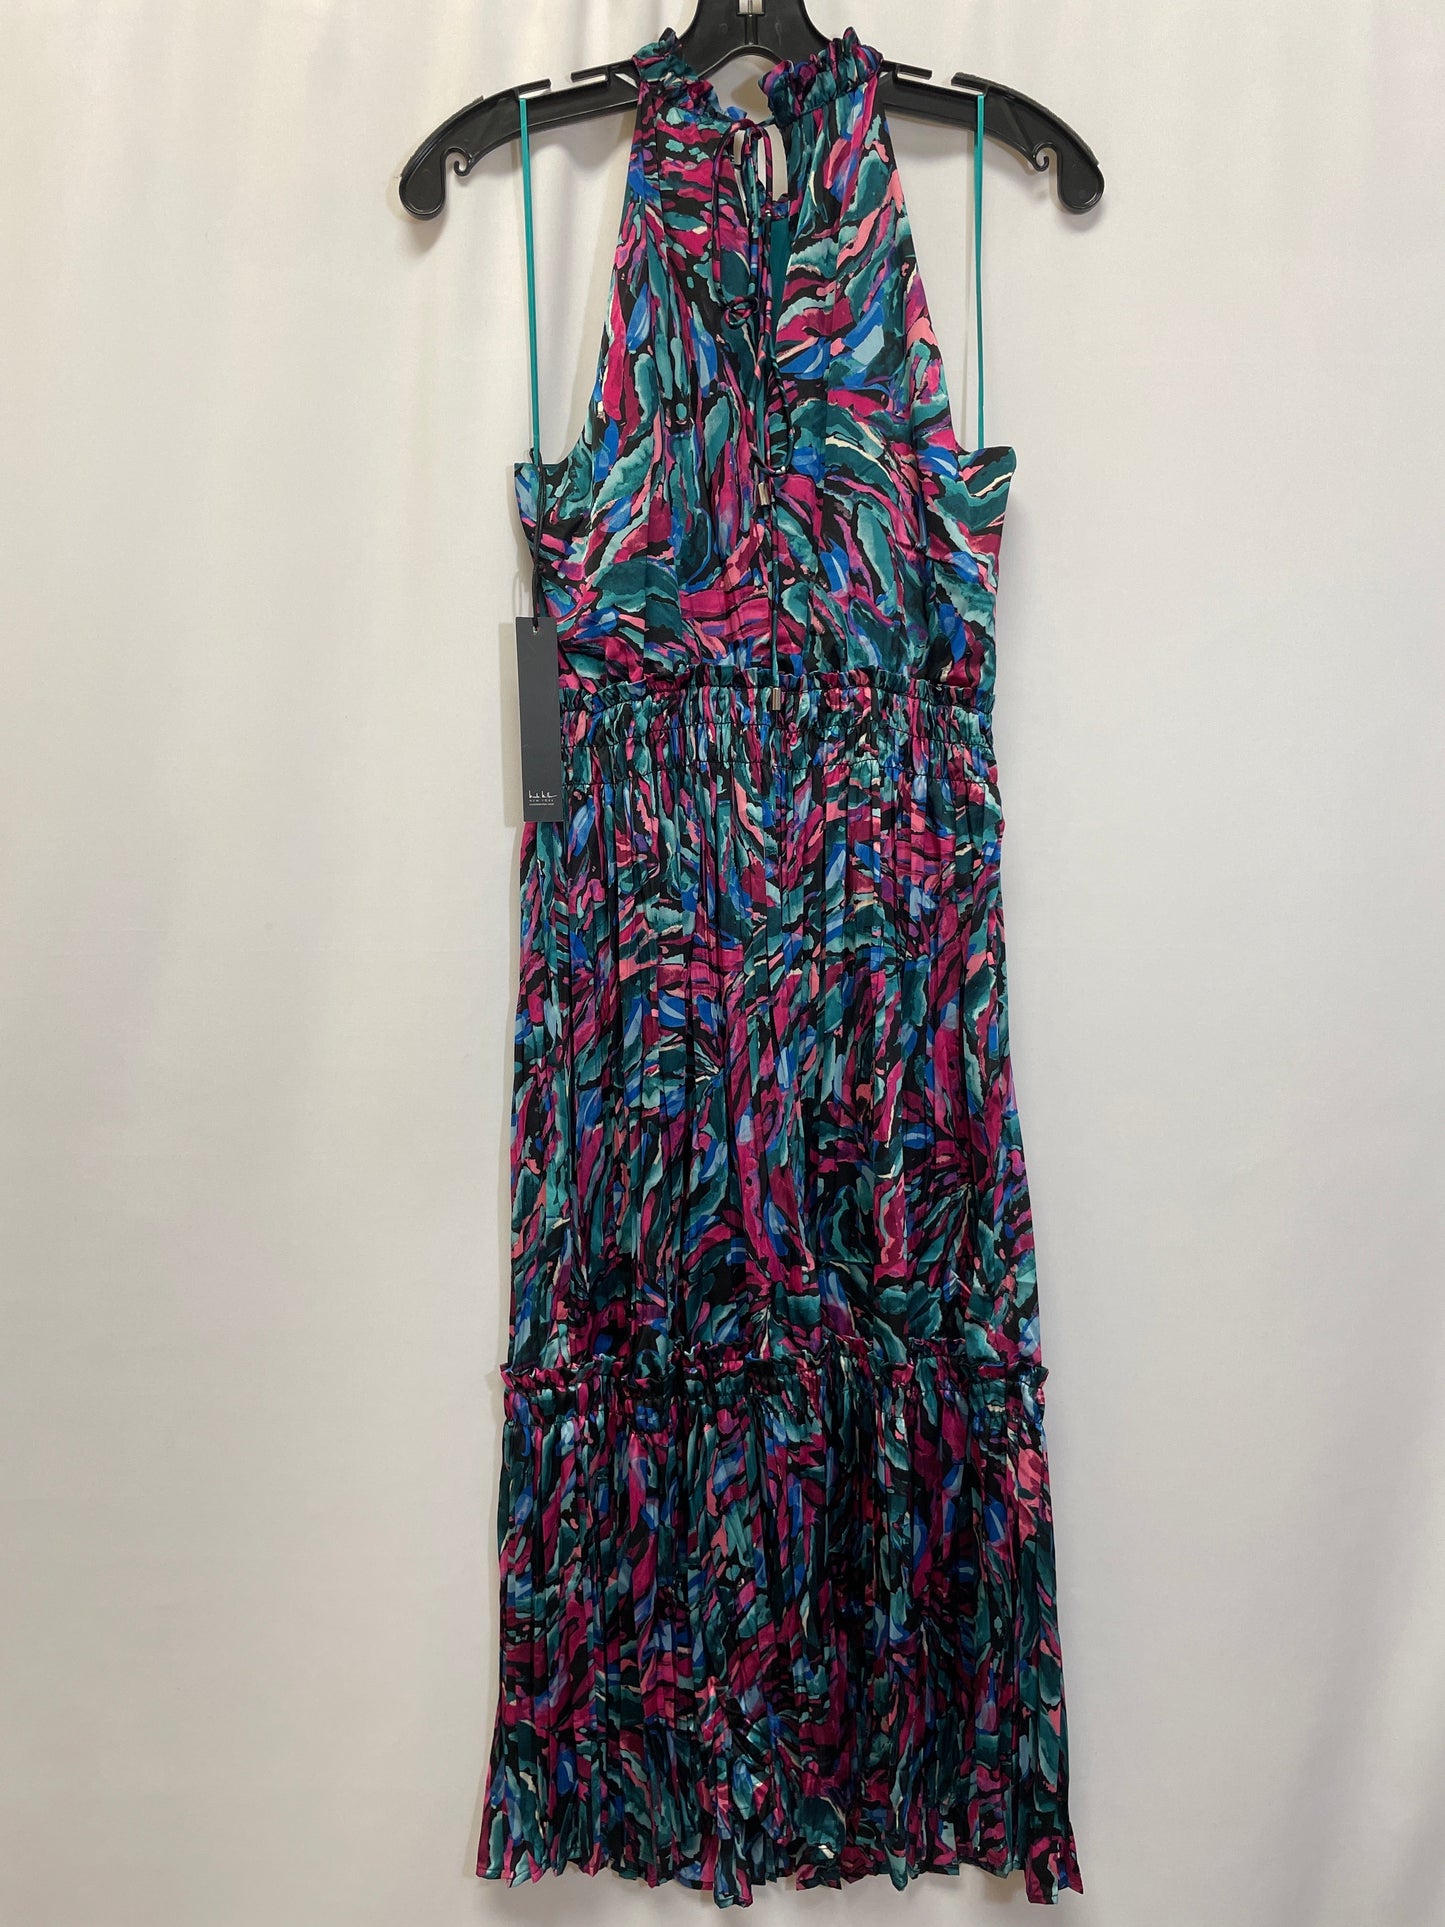 Dress Casual Midi By Nicole By Nicole Miller  Size: M